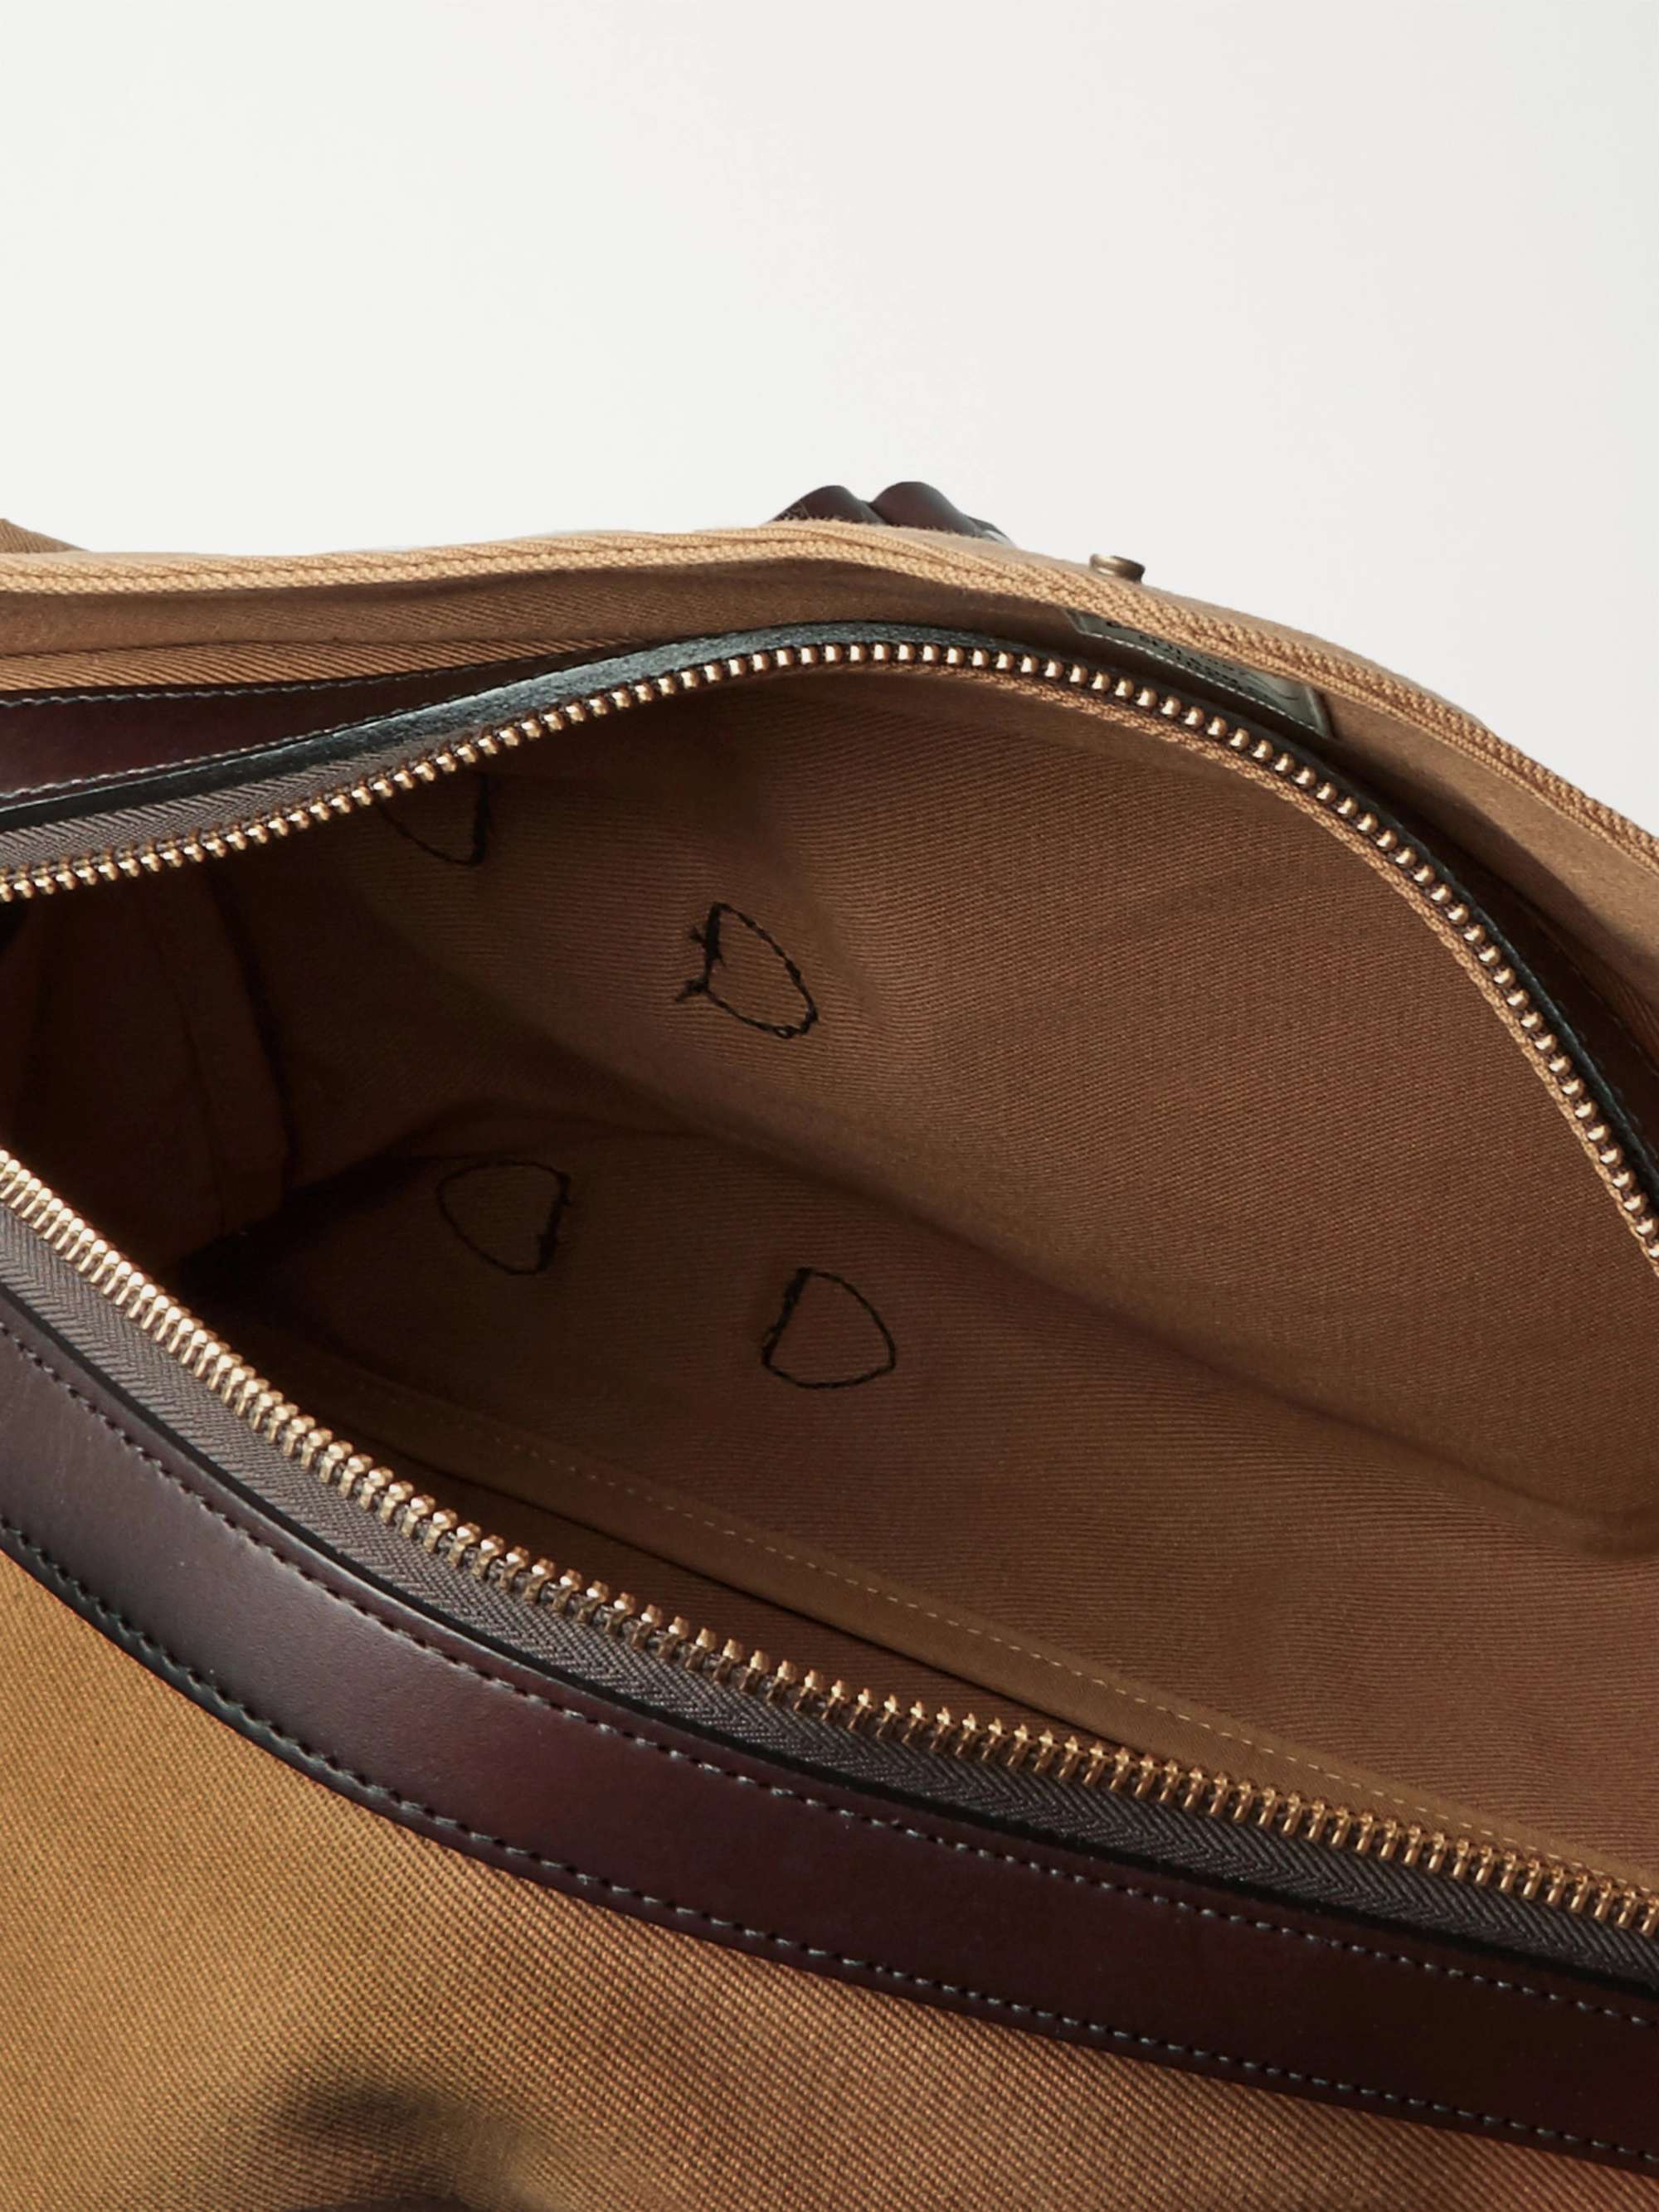 FILSON Leather-Trimmed Twill Duffle Bag